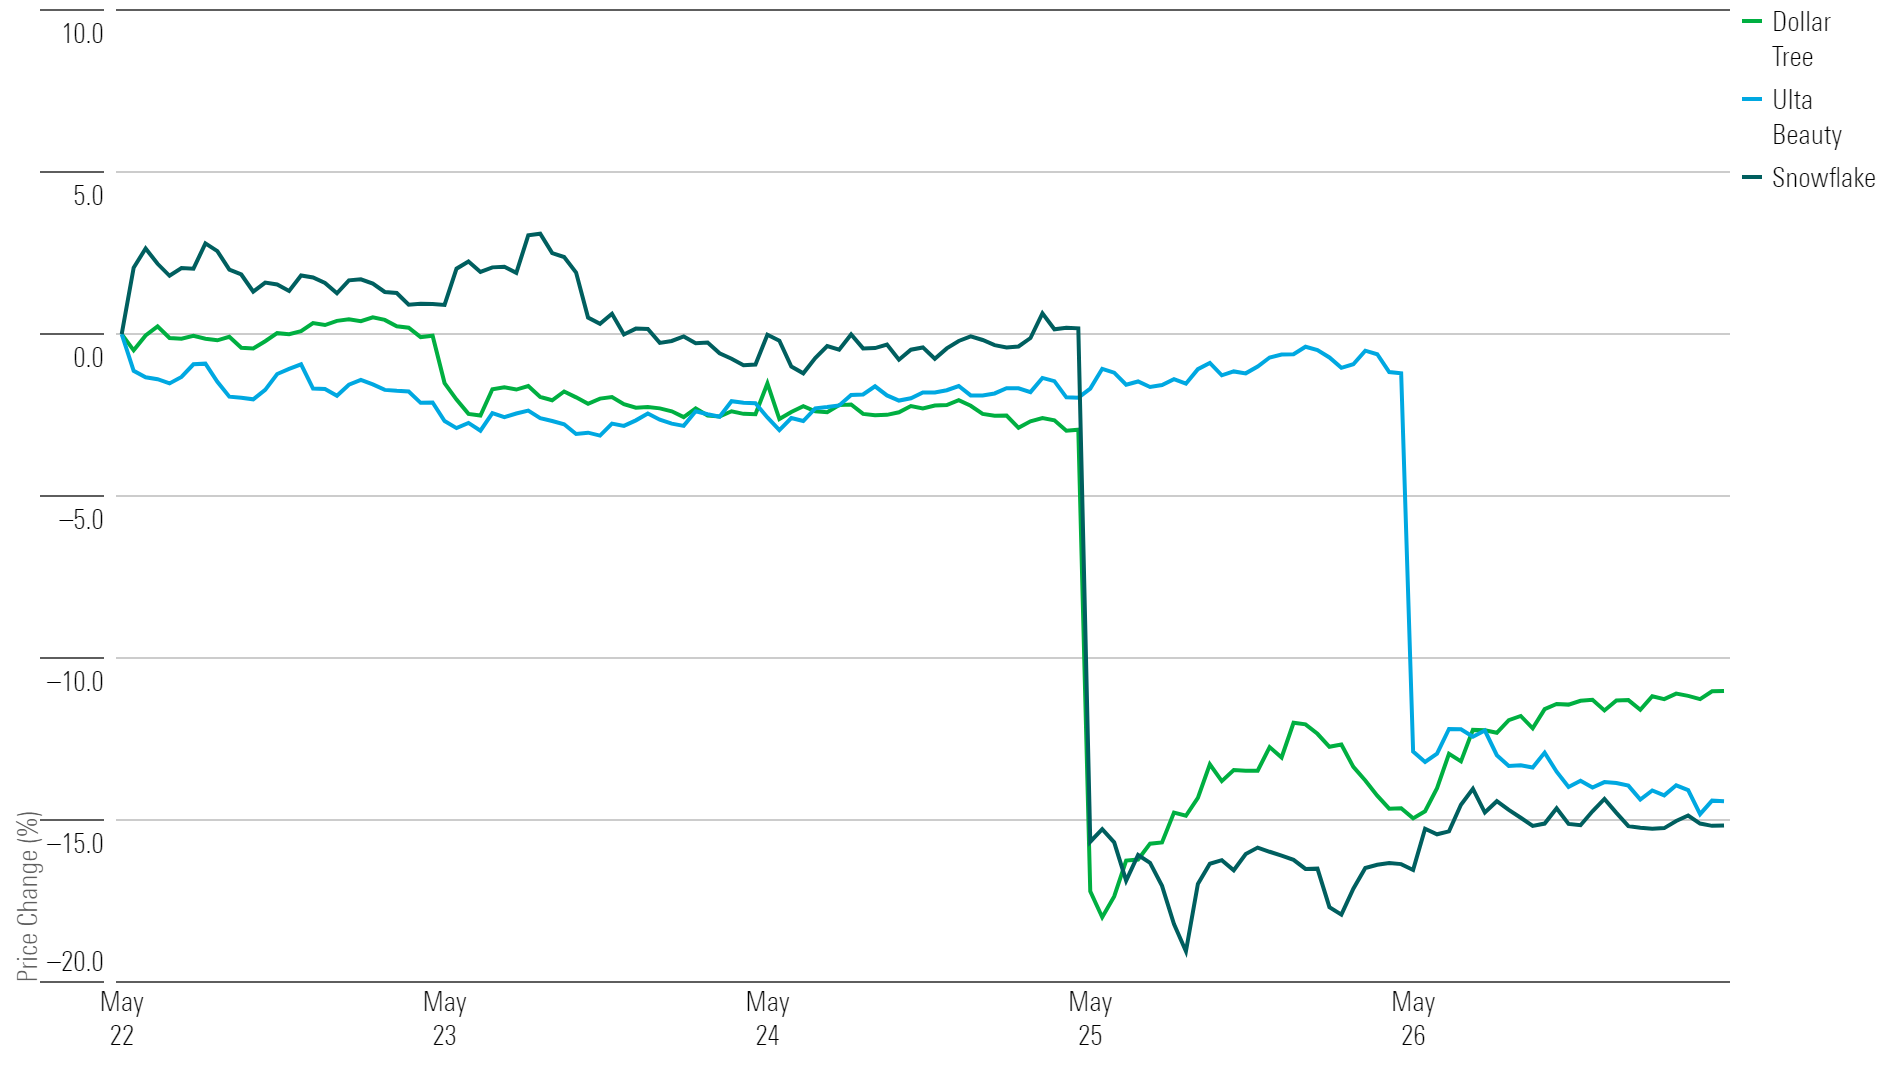 A line chart showing the performance of Dollar Tree, Ulta Beauty, and Snowflake stock.